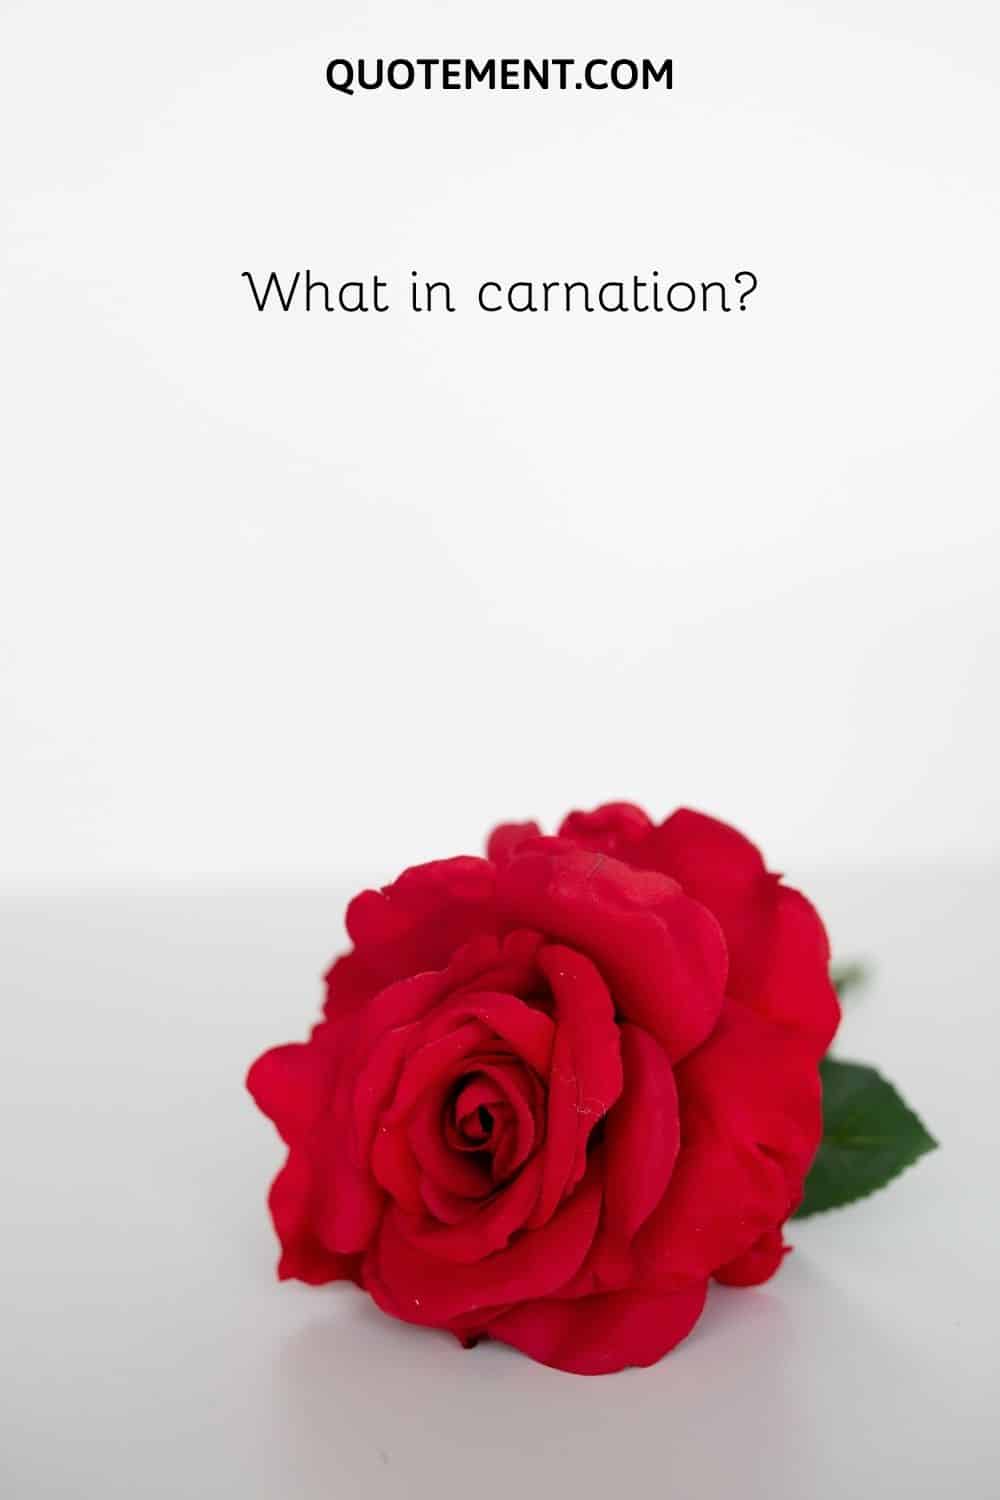 What in carnation